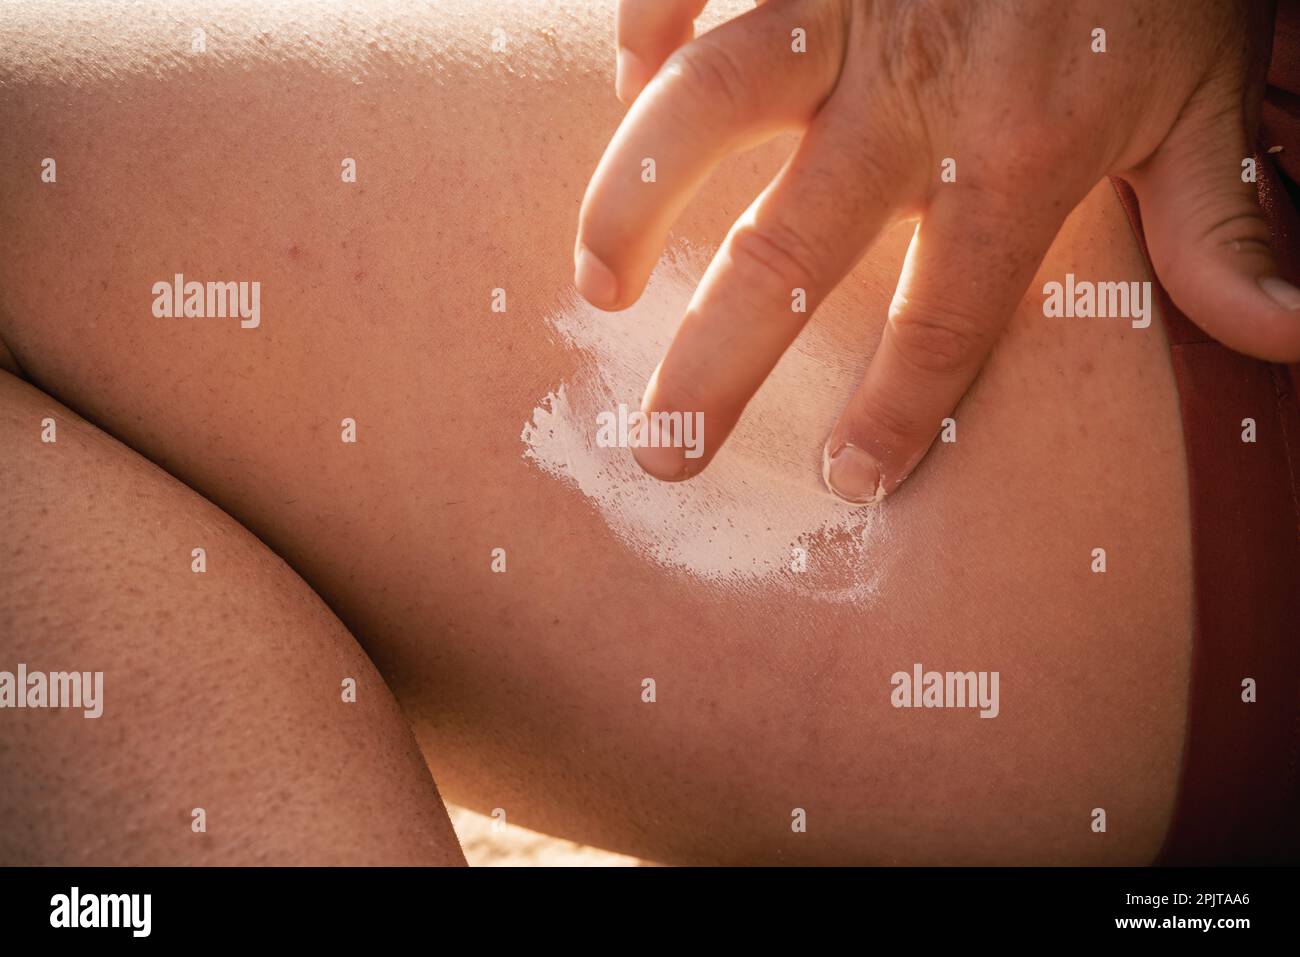 Young caucasian woman hiker in wilderness in her 30s applies pinkish white cream to skin with hand and fingers because of rash or chaffing. Stock Photo